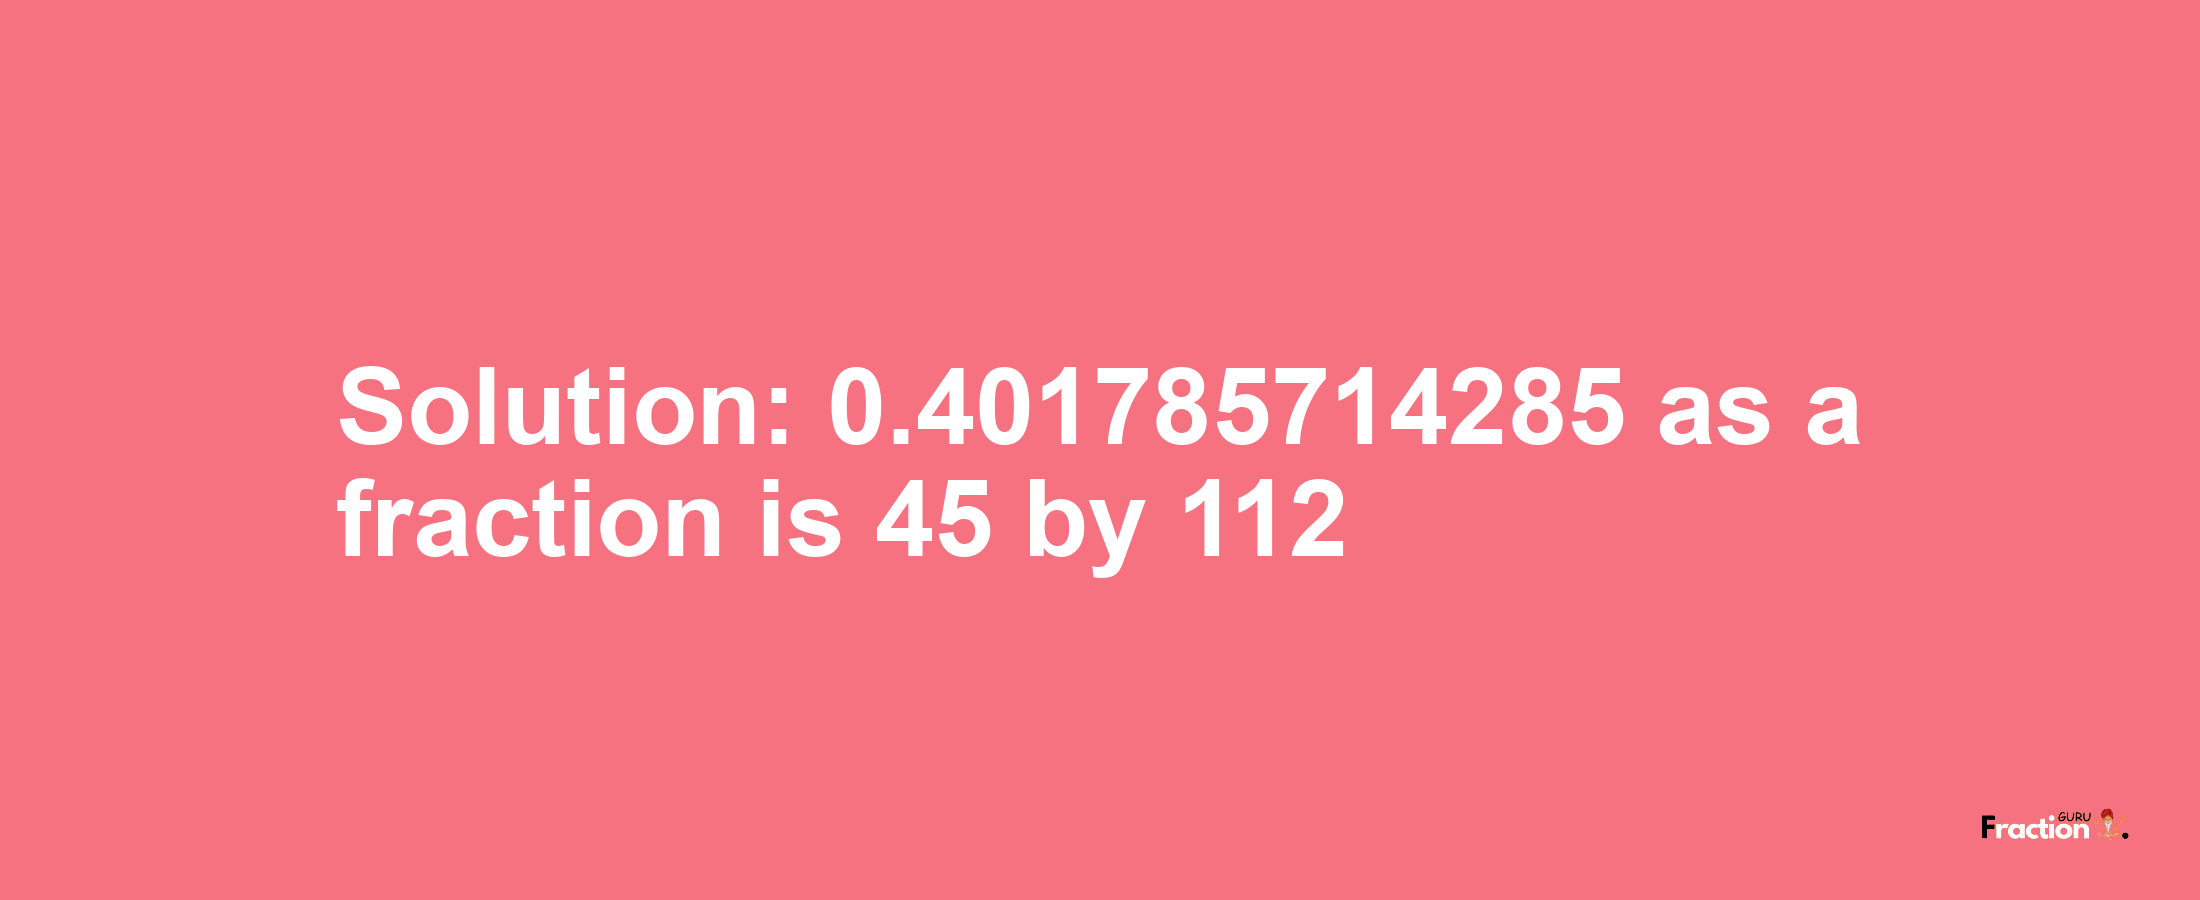 Solution:0.401785714285 as a fraction is 45/112